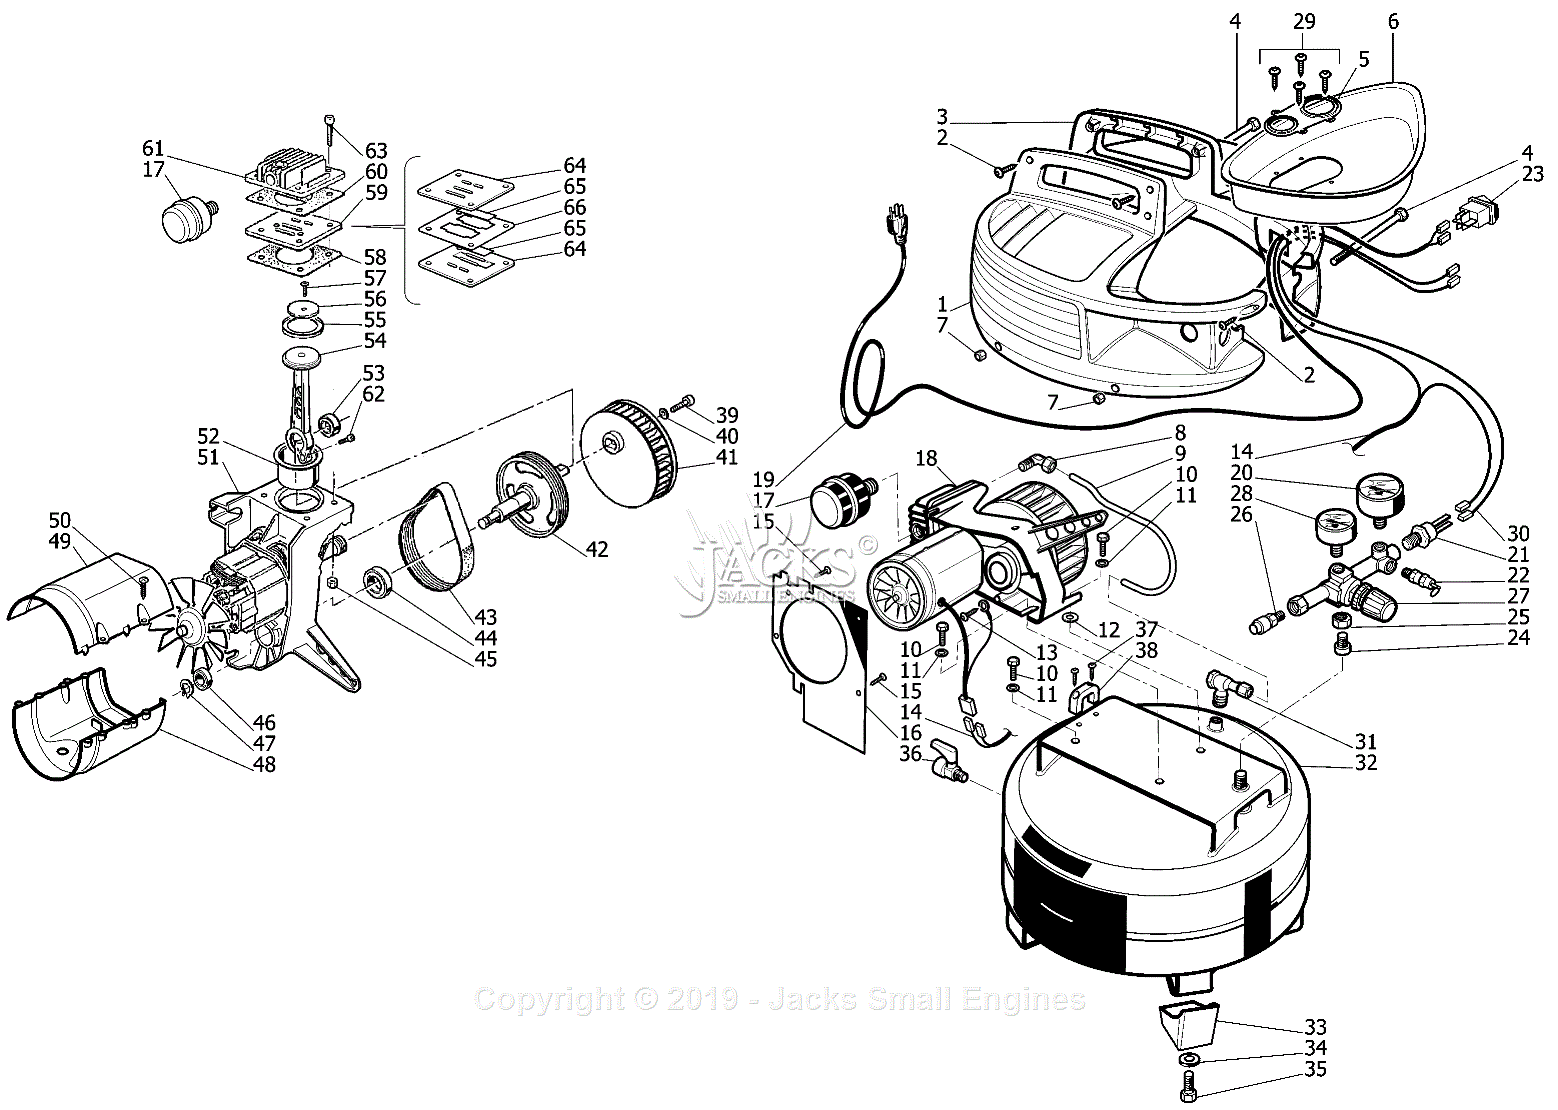 Bostitch CAP2000P-OF Type 1 Parts Diagram for Air Compressor  Bostitch Air Compressor Wiring Diagram    Jacks Small Engines